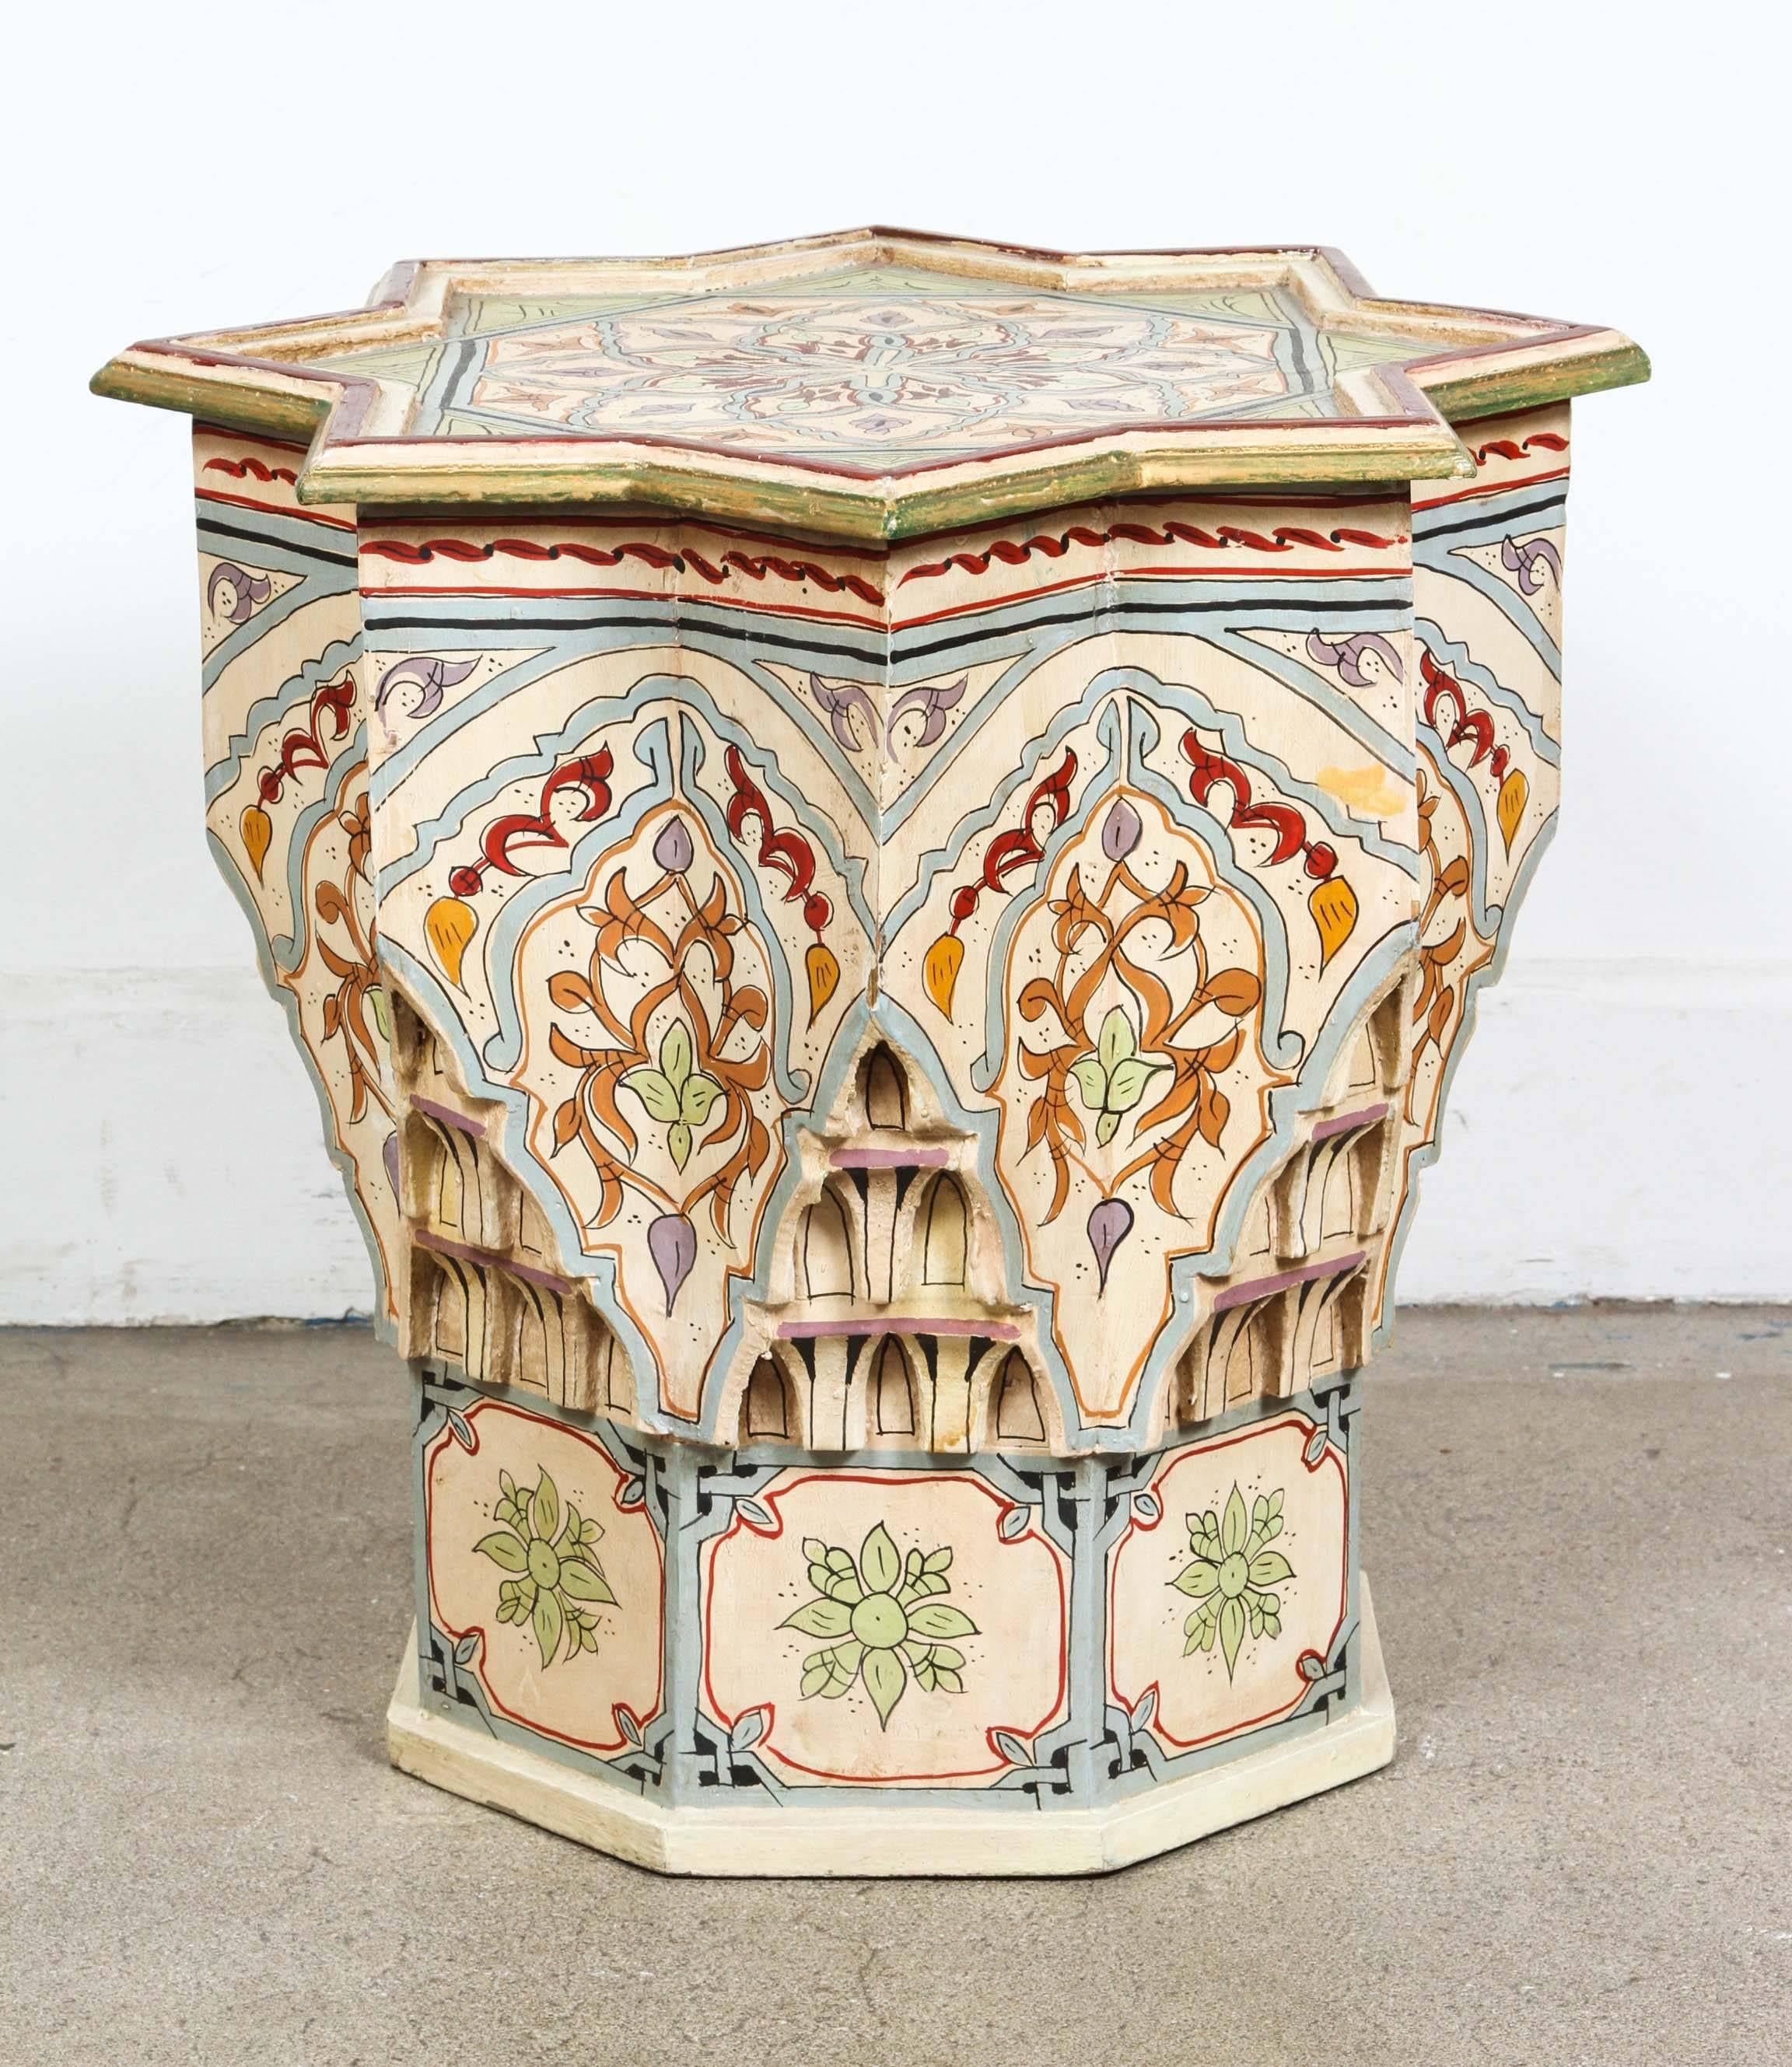 Vintage Moroccan wooden hand-painted and carved side occasional table with Moorish designs.
Hispano Moresque style in ivory background color with multicolored red and sage floral and geometric designs.
Very decorative side table fine artwork on a